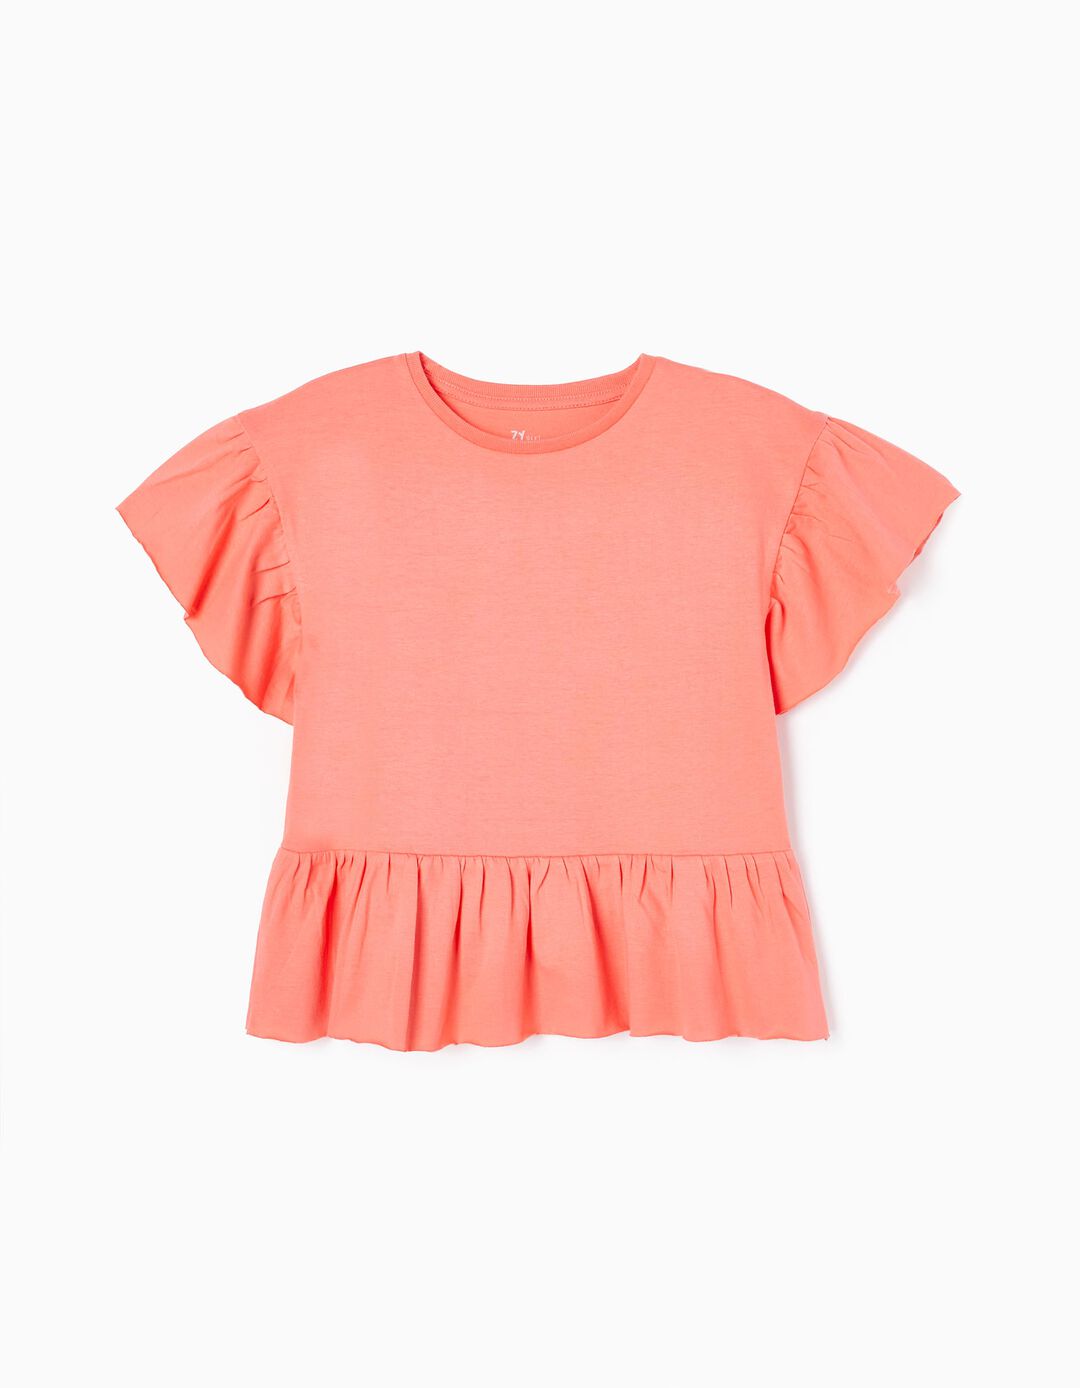 Cotton T-shirt with Frills for Girls, Coral